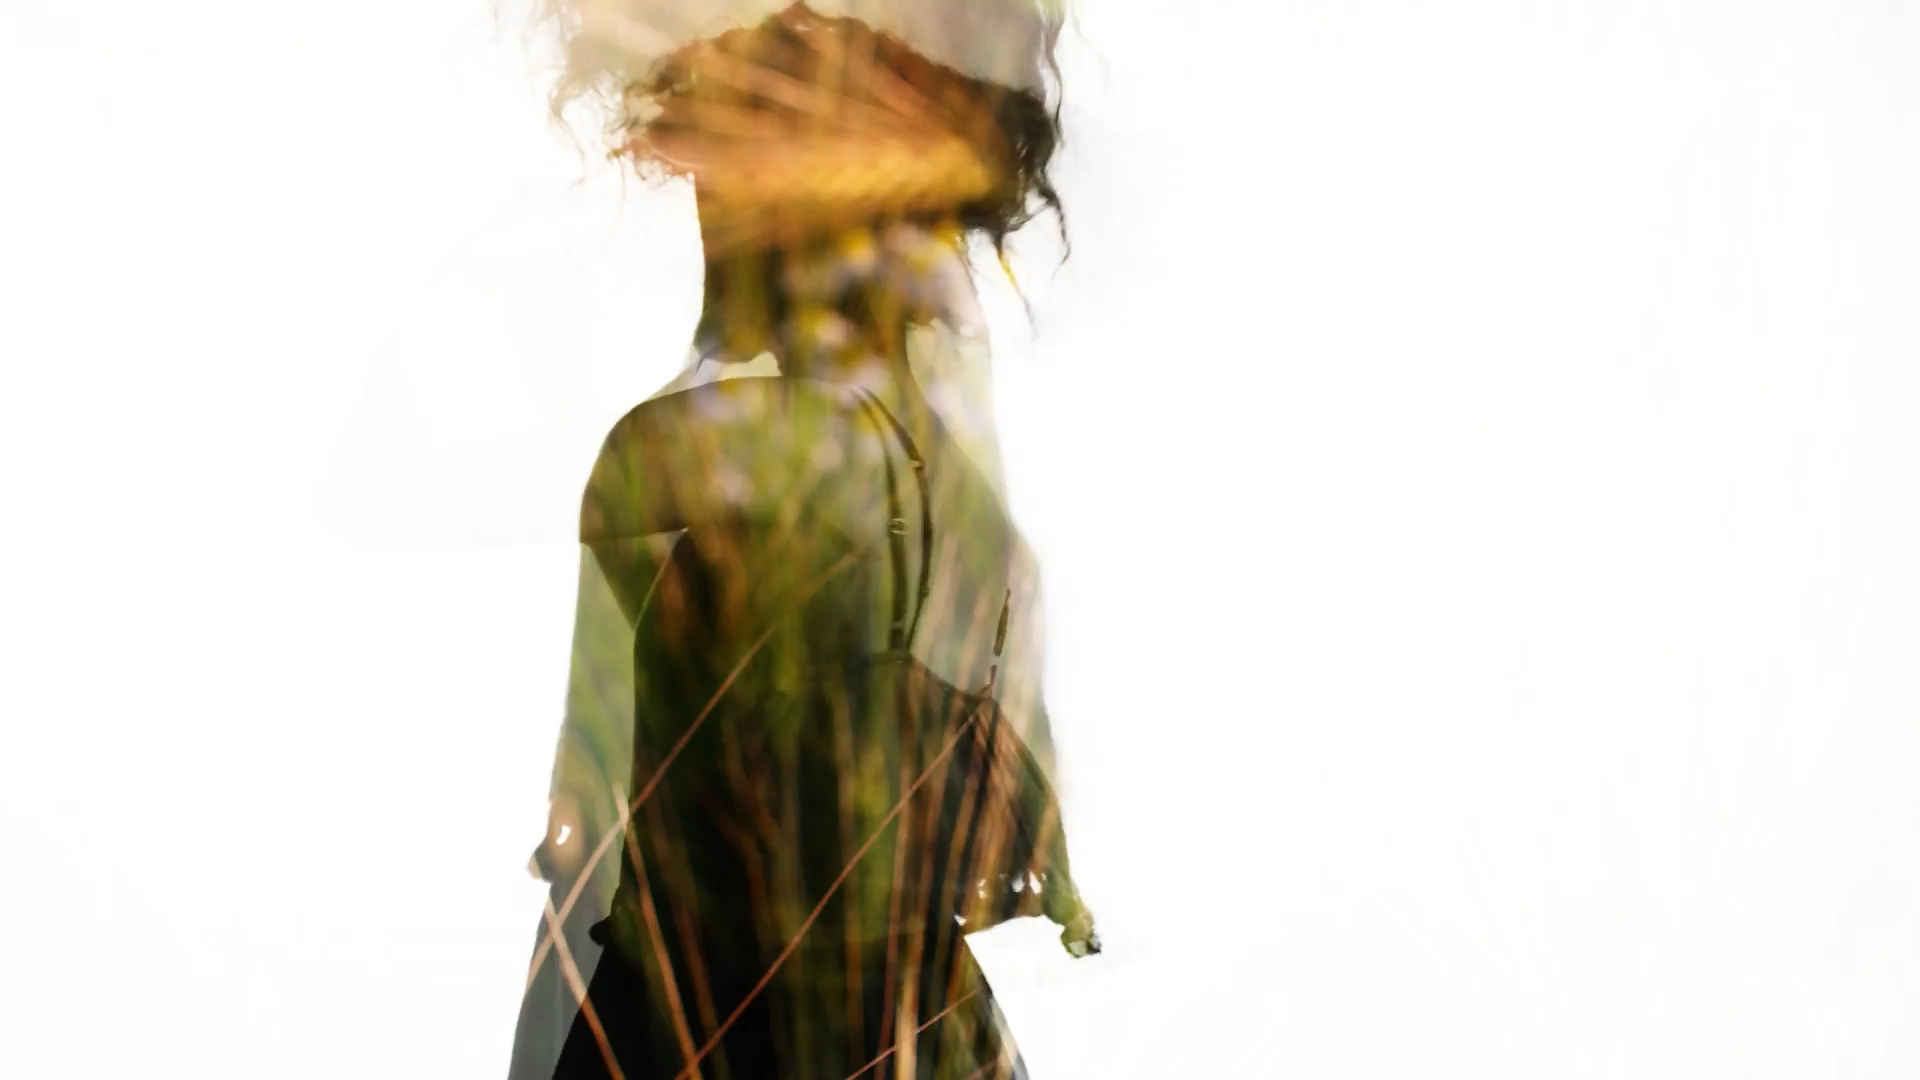 Double exposure image of a woman dancing with nature